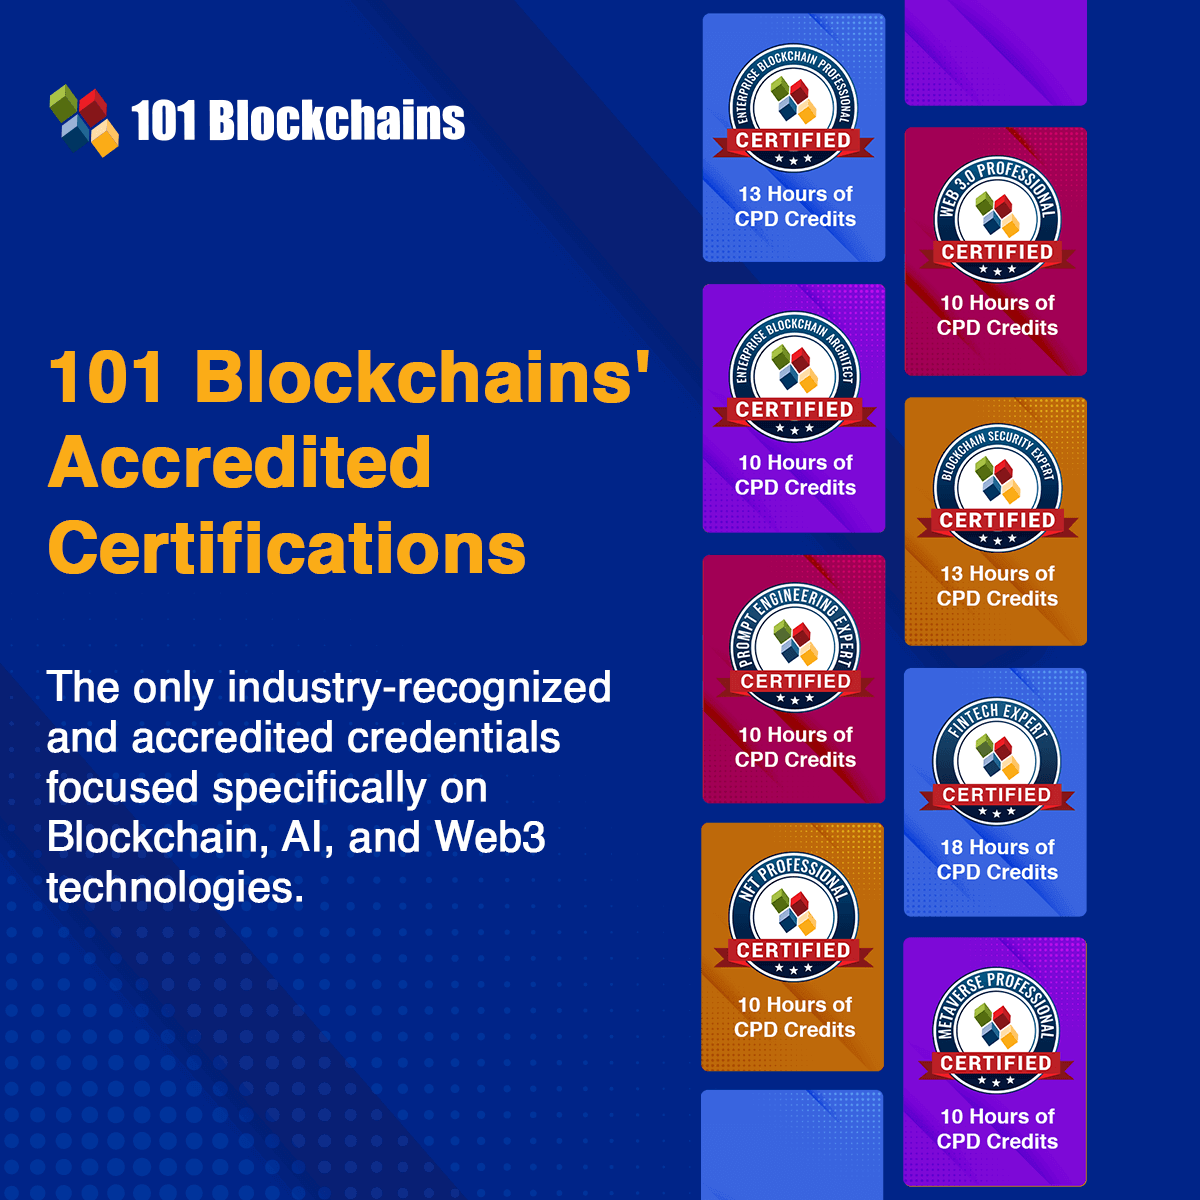 101 Blockchains' Accredited Certifications